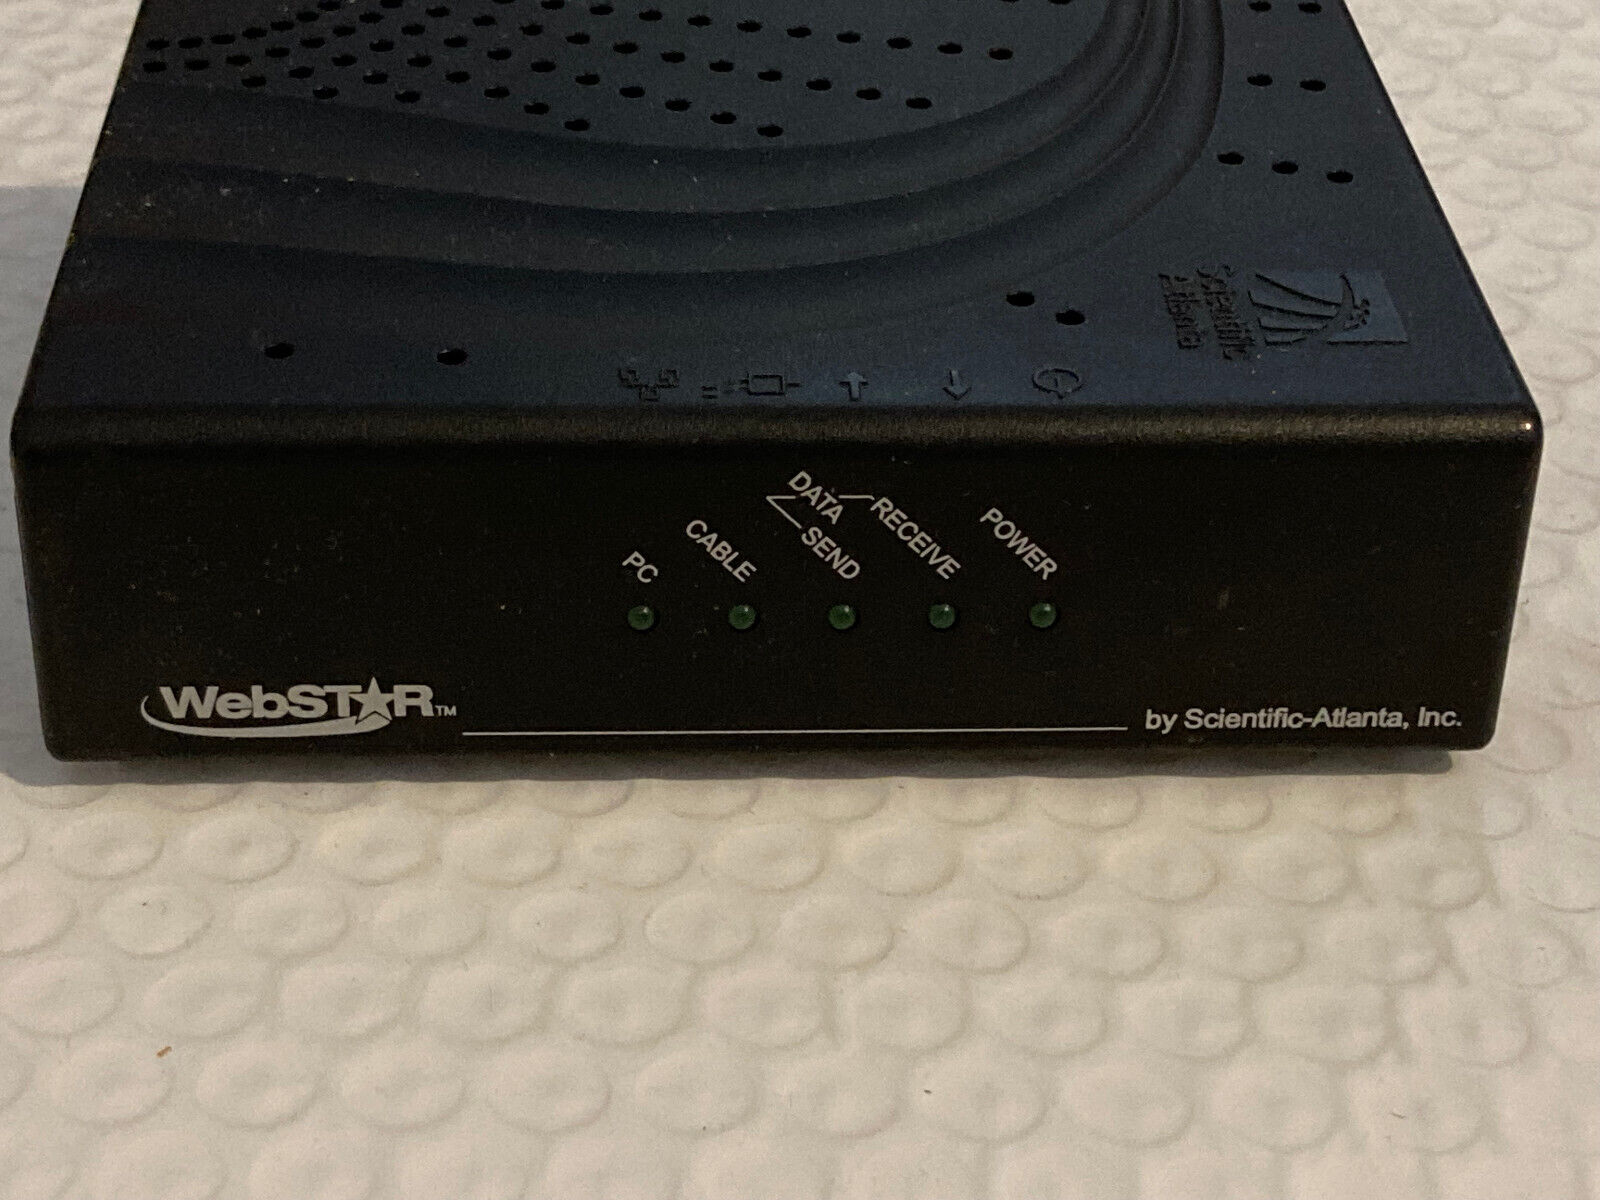 CISCO Cable Modem 2100, DPC2100R2 without power adapter